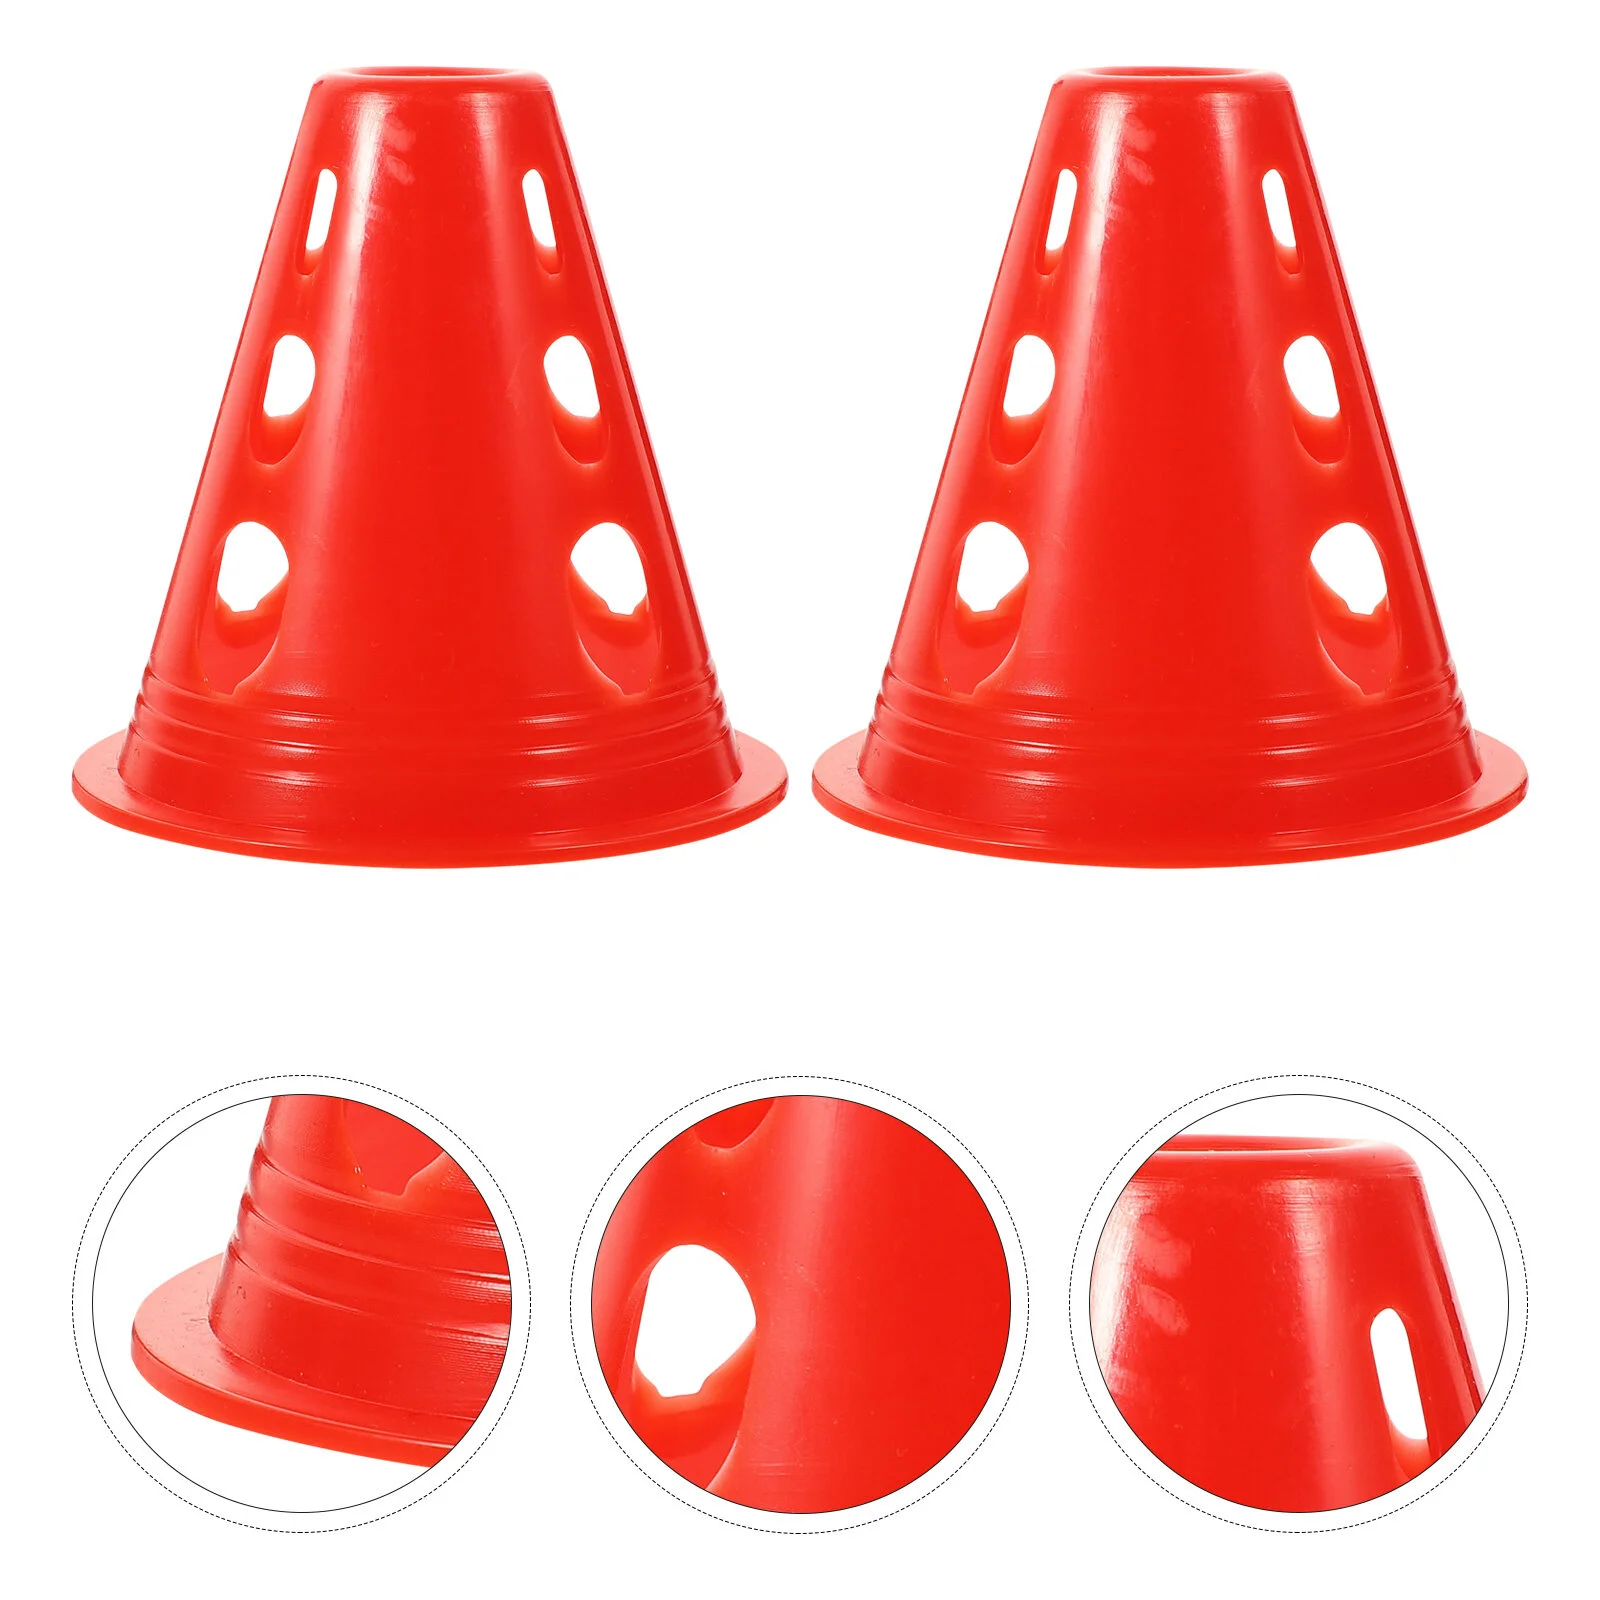 

20 Pcs Mini Soccer Ball Skates Football Cone Roller Skating Cones Hole Obstacle Course Indoor Sports Plastic Training